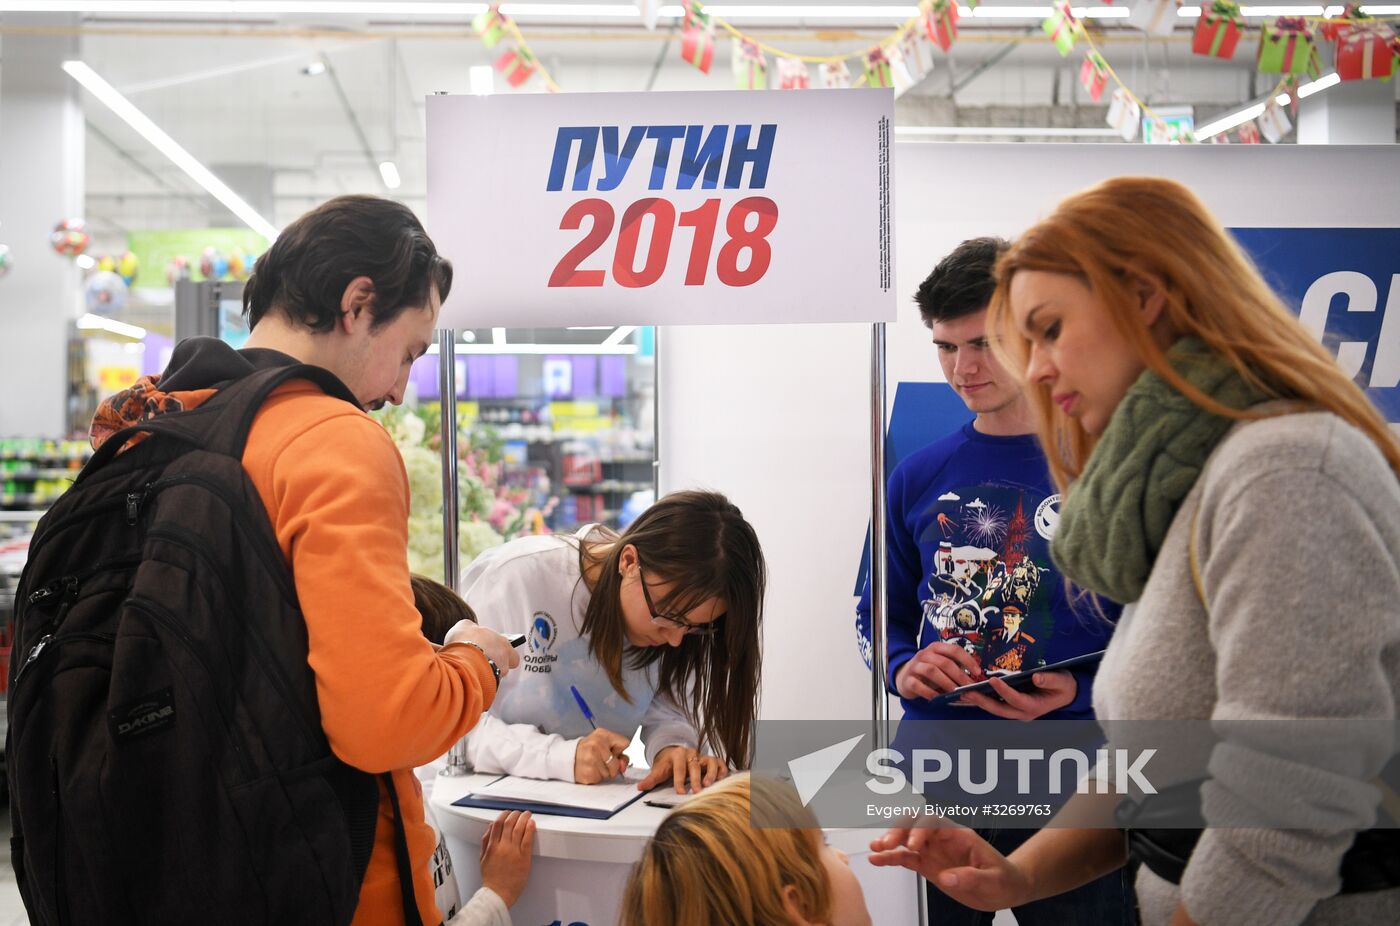 Collection of signatures supporting Vladimir Putin’s presidential bid is underway